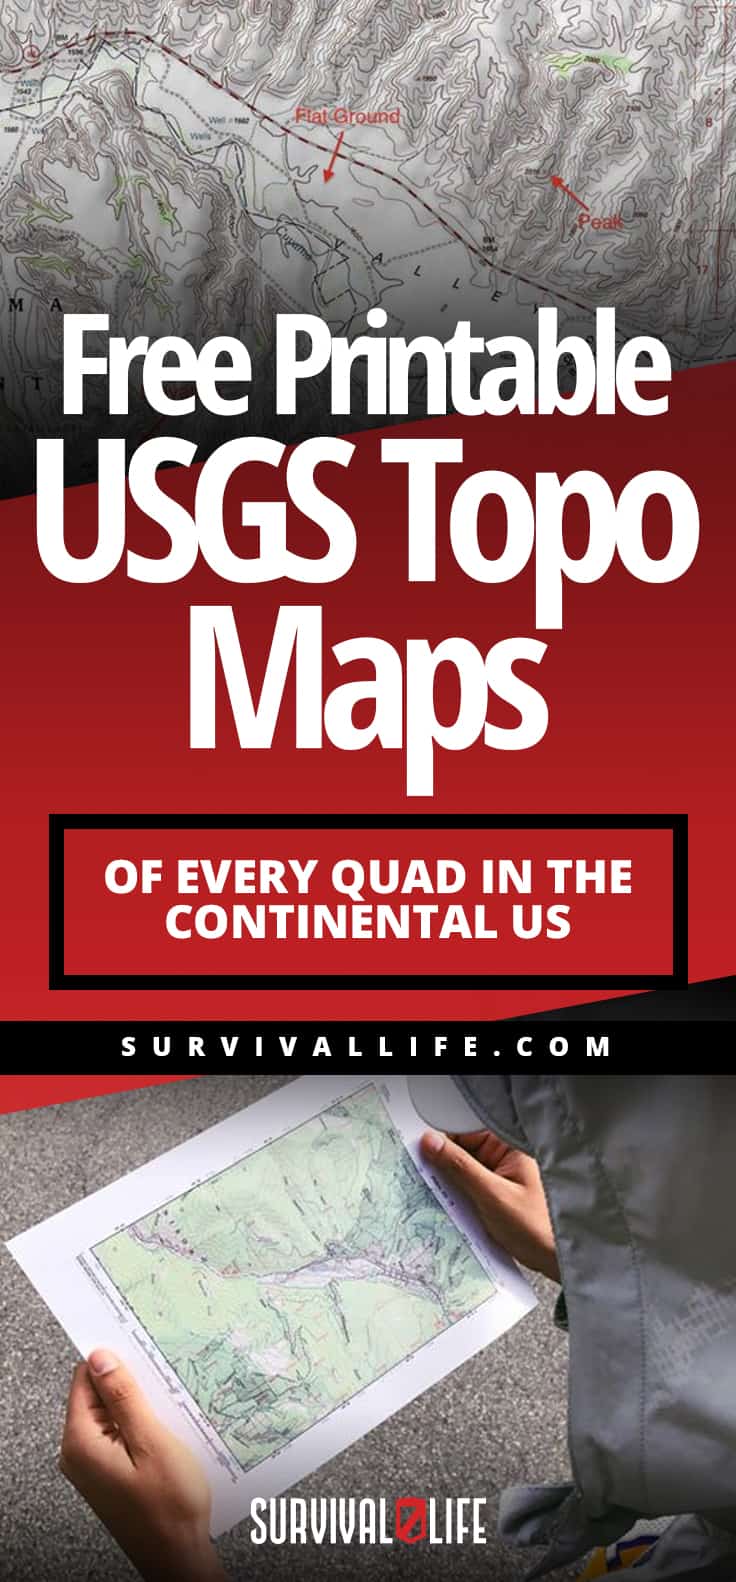 USGS Topo Maps Of Every Quad In The Continental US [Free Printable ] | https://survivallife.com/printable-usgs-topo-maps/